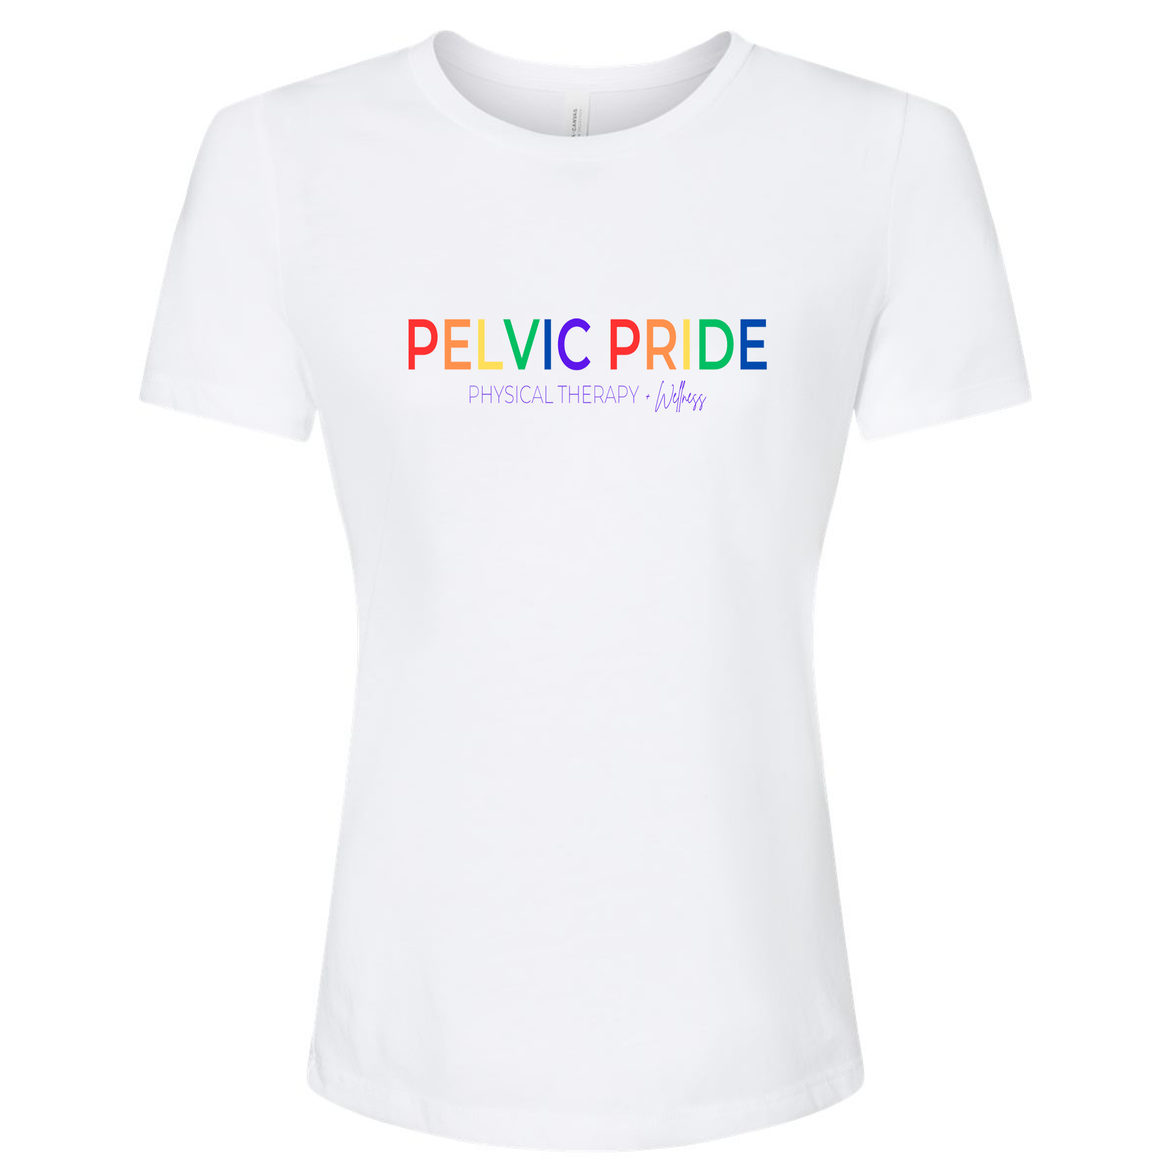 Women's Relaxed Fit Pelvic Pride Baltimore Shirt